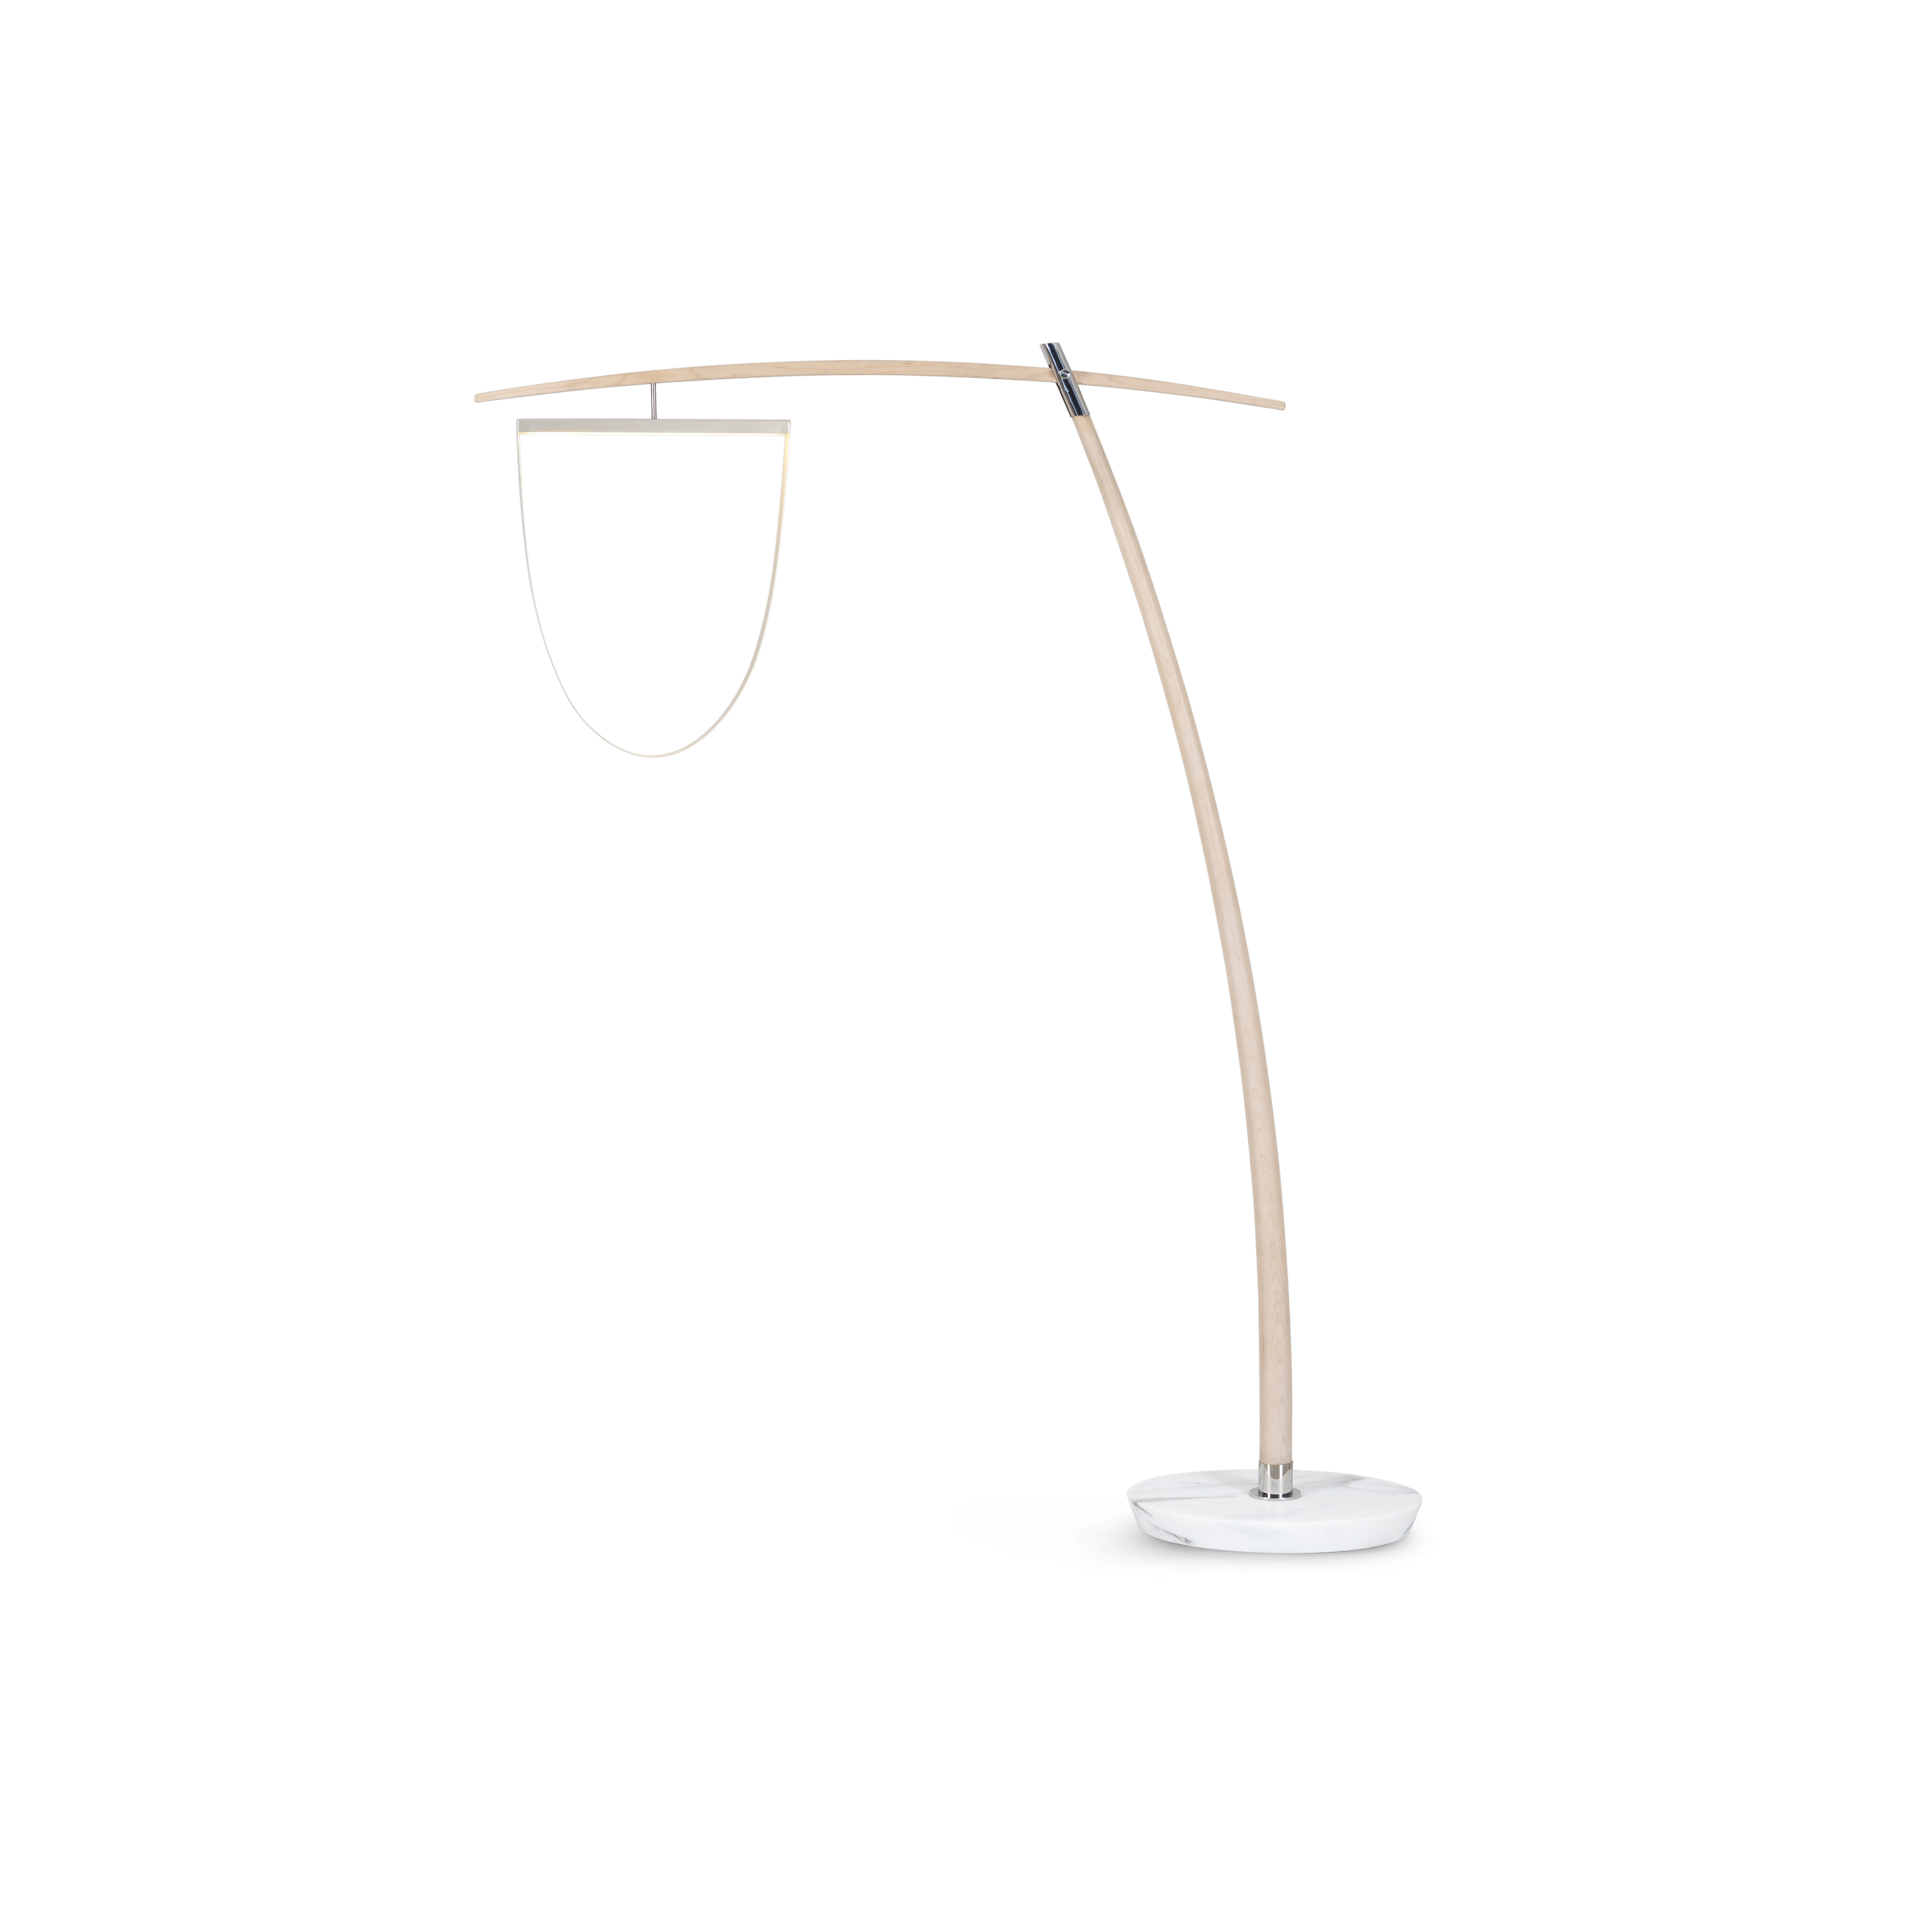 You are currently viewing Lima Arc Floor Lamp